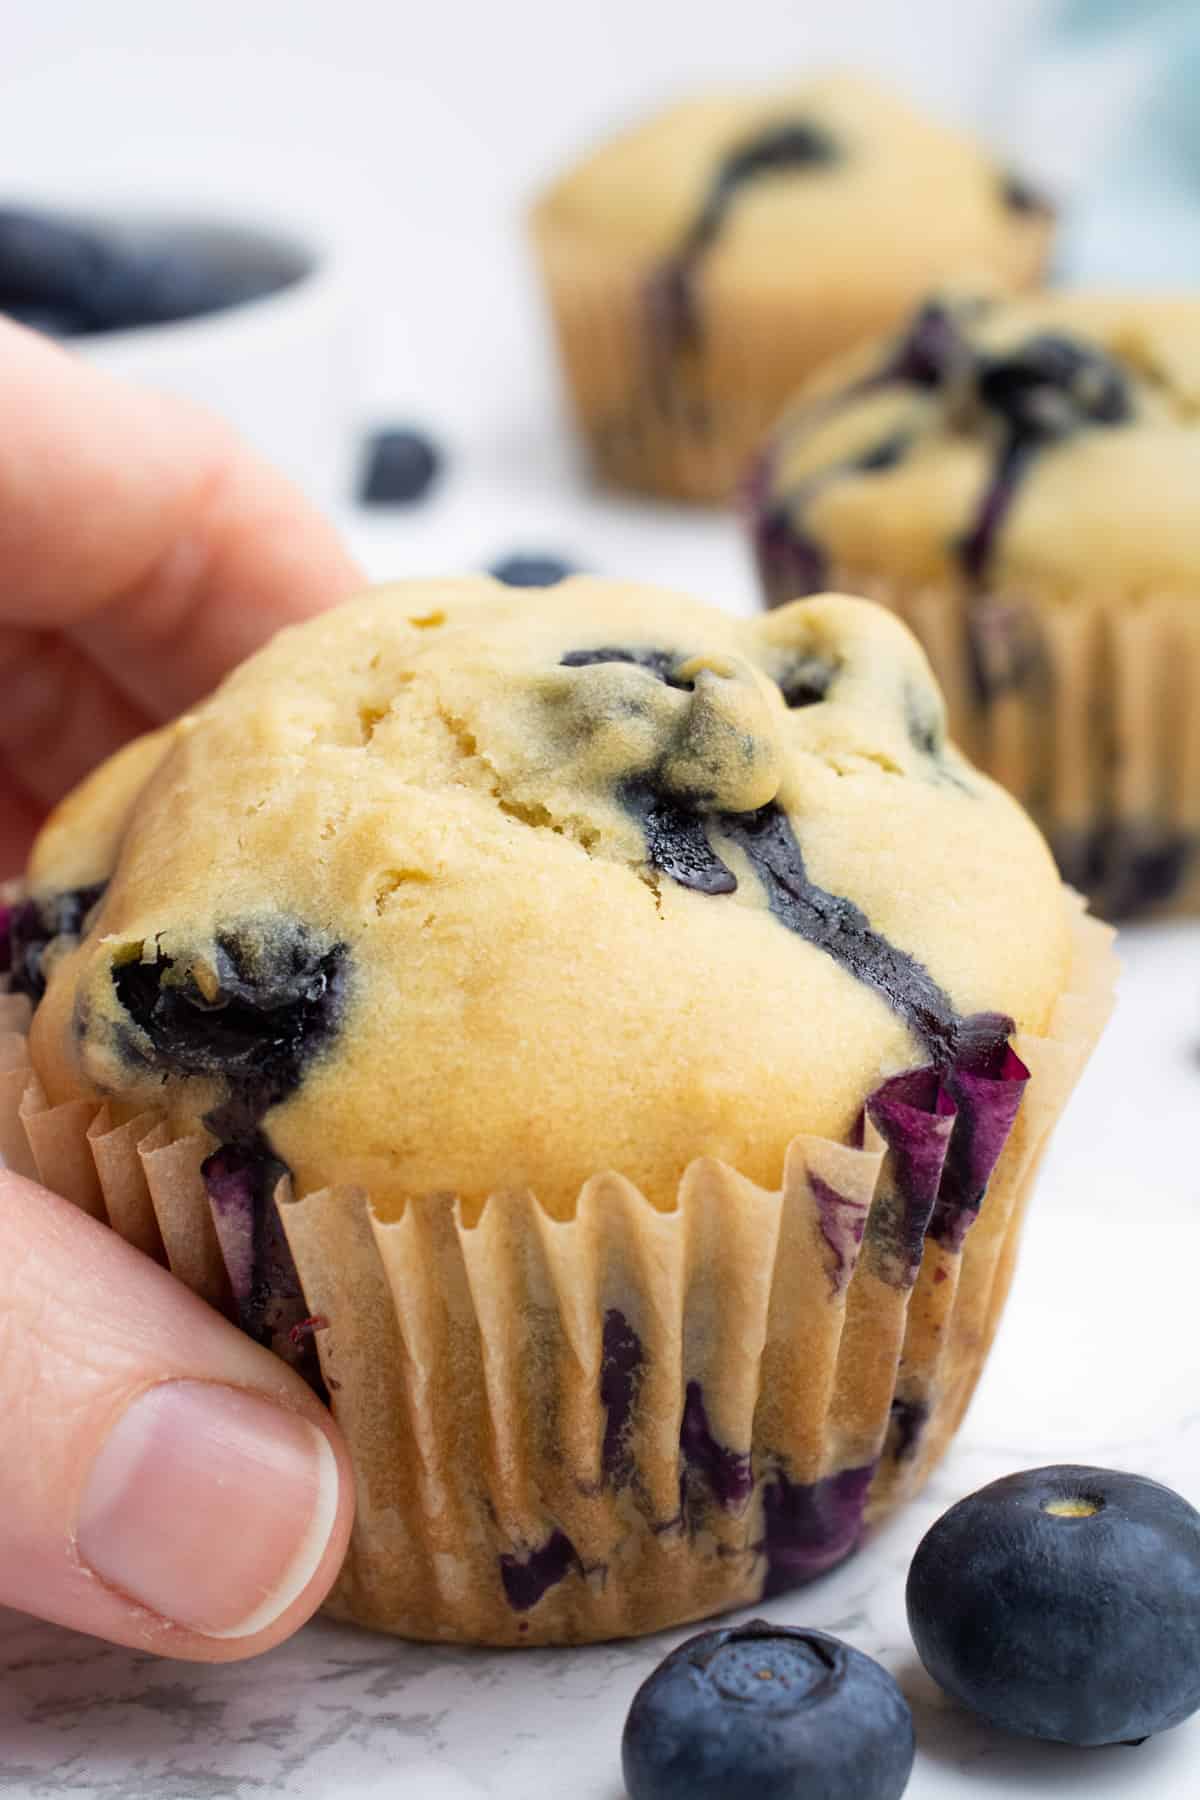 A hand grabbing a vegan blueberry muffin with more muffins and blueberries behind.